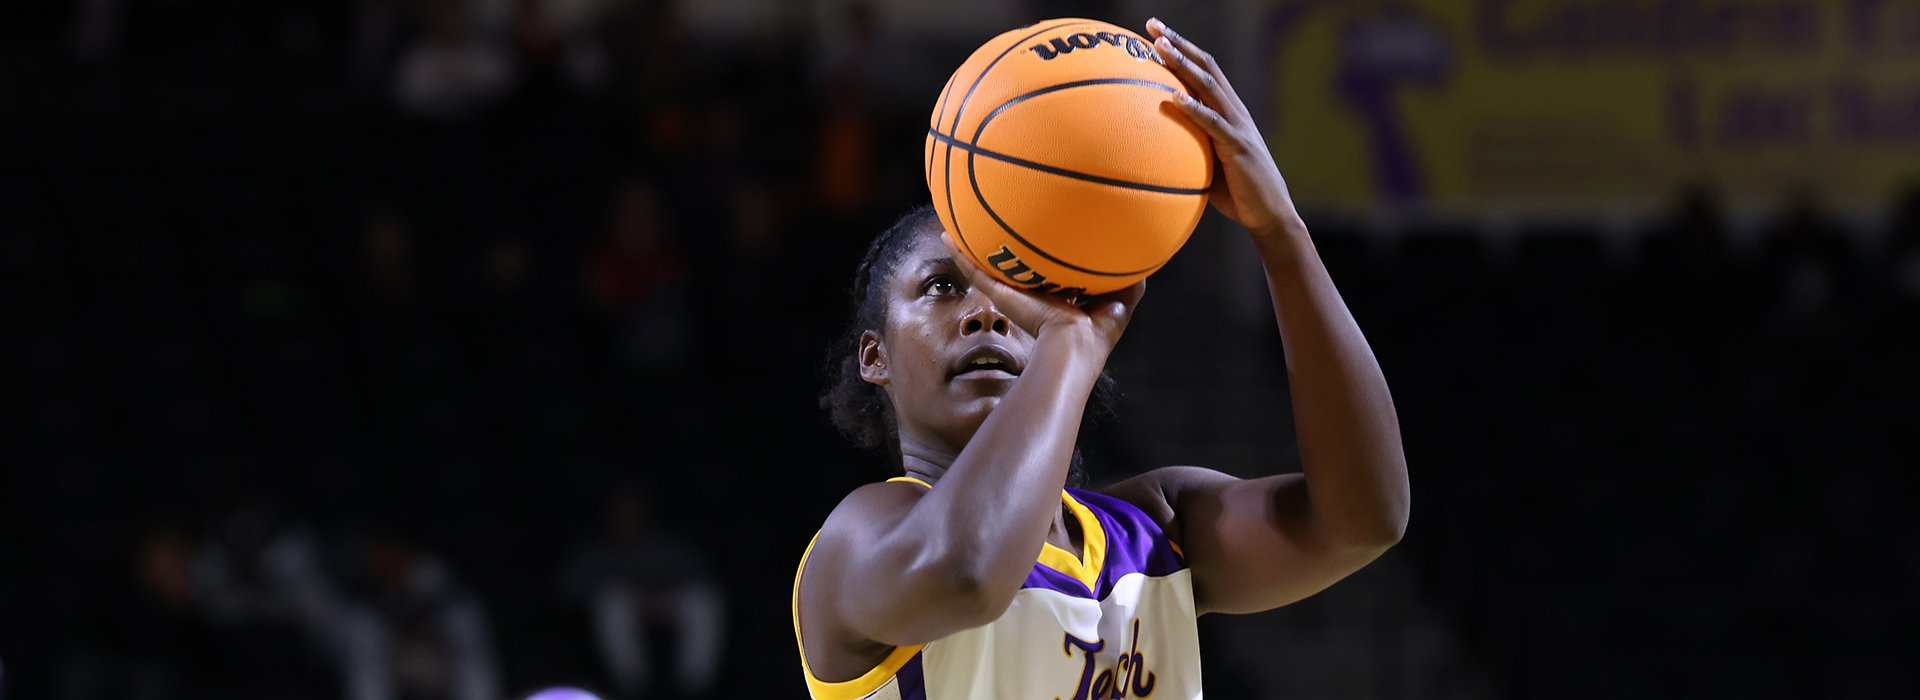 Tech women open the regular season Monday with visit from Ball State